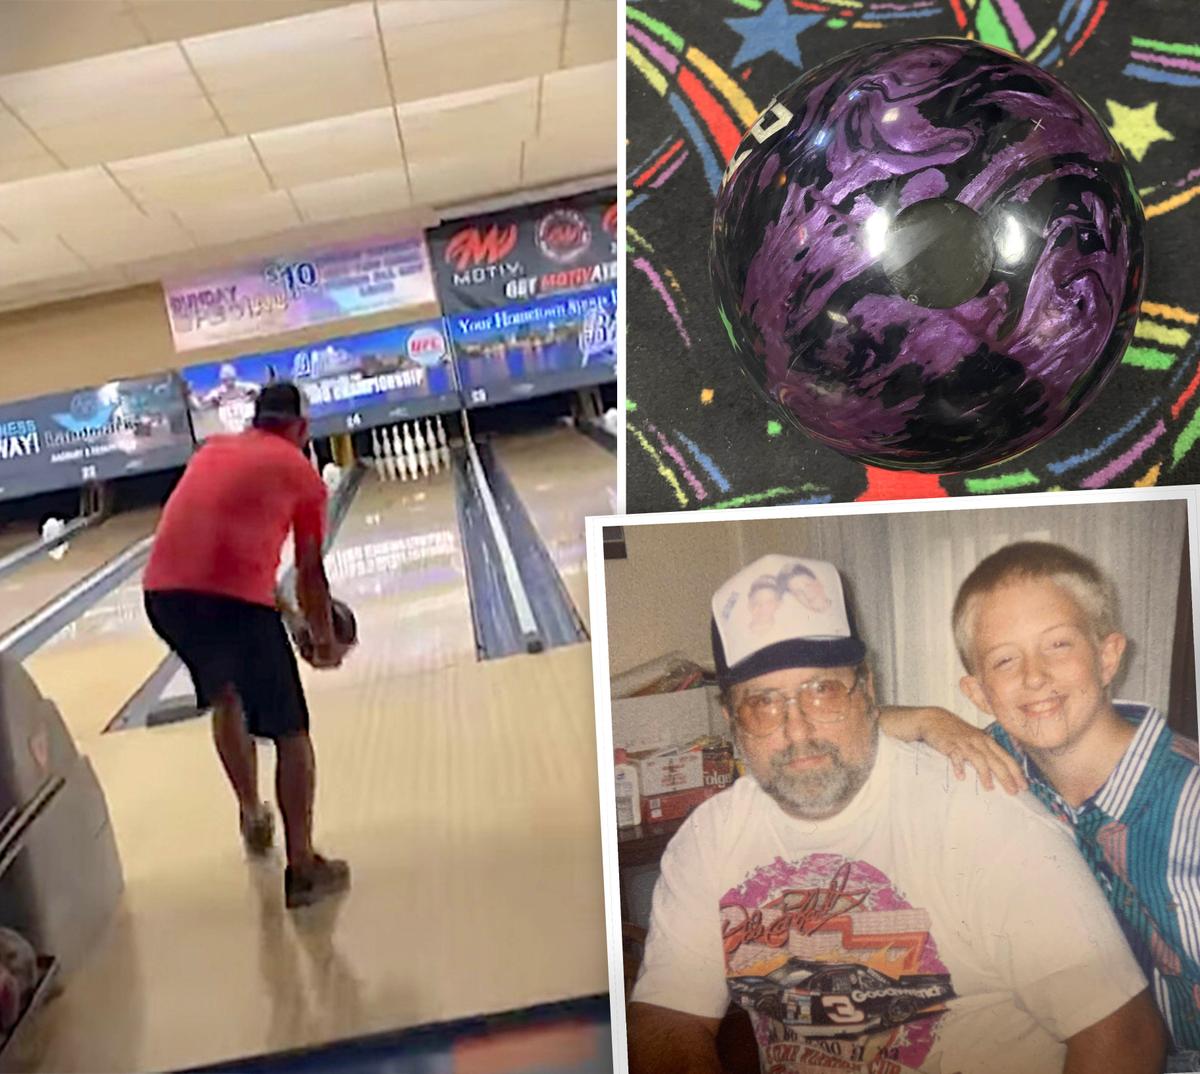 (Left) A video screen shot of Hinkle's memorable bowling night; (Top-Right) The bowling ball containing Hinkle's dad’s ashes; (Bottom-Right) John Hinkle (R), as a boy, with his father. (Courtesy of <a href="https://www.facebook.com/john.hinkle.77">John Hinkle</a>)